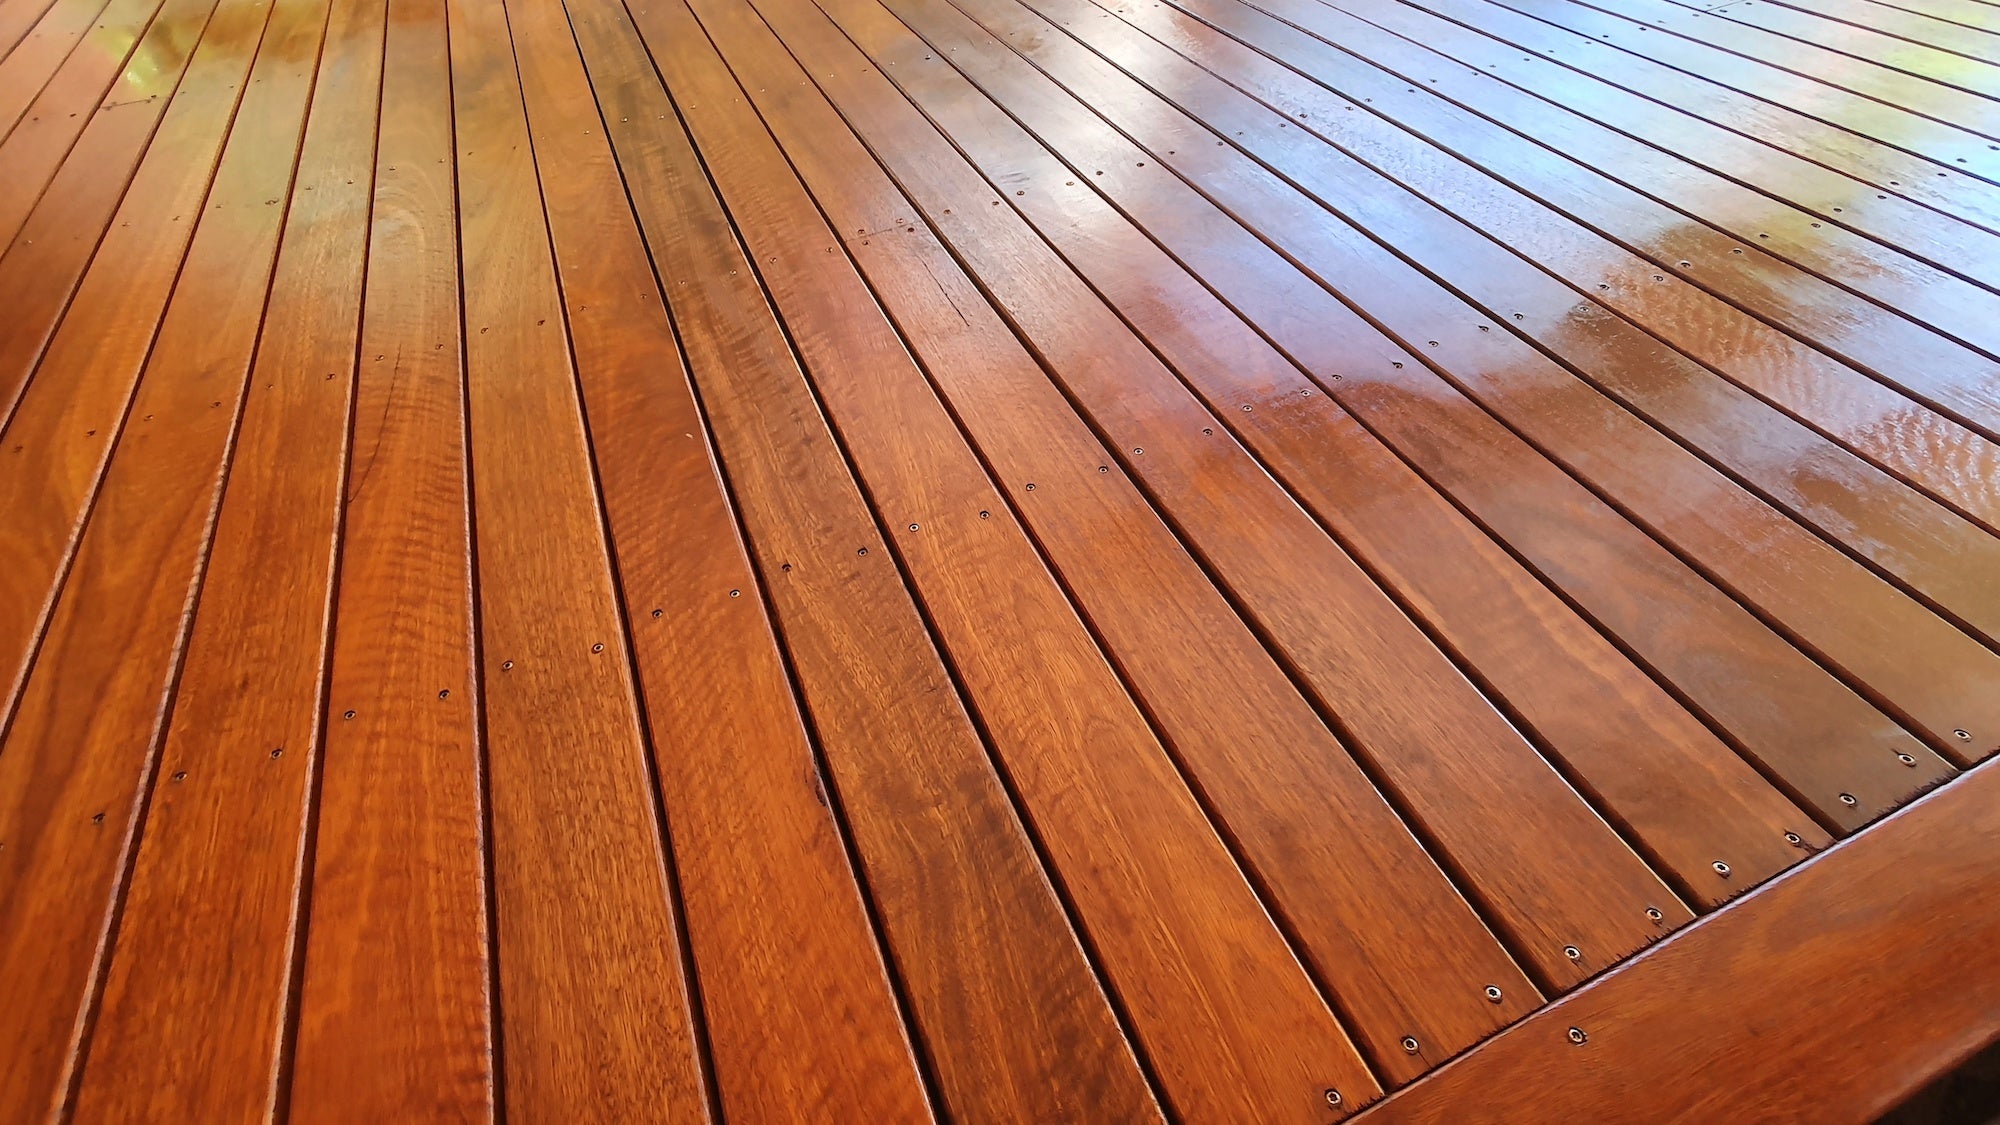 What are The Differences between Semi Transparent and Solid Stain